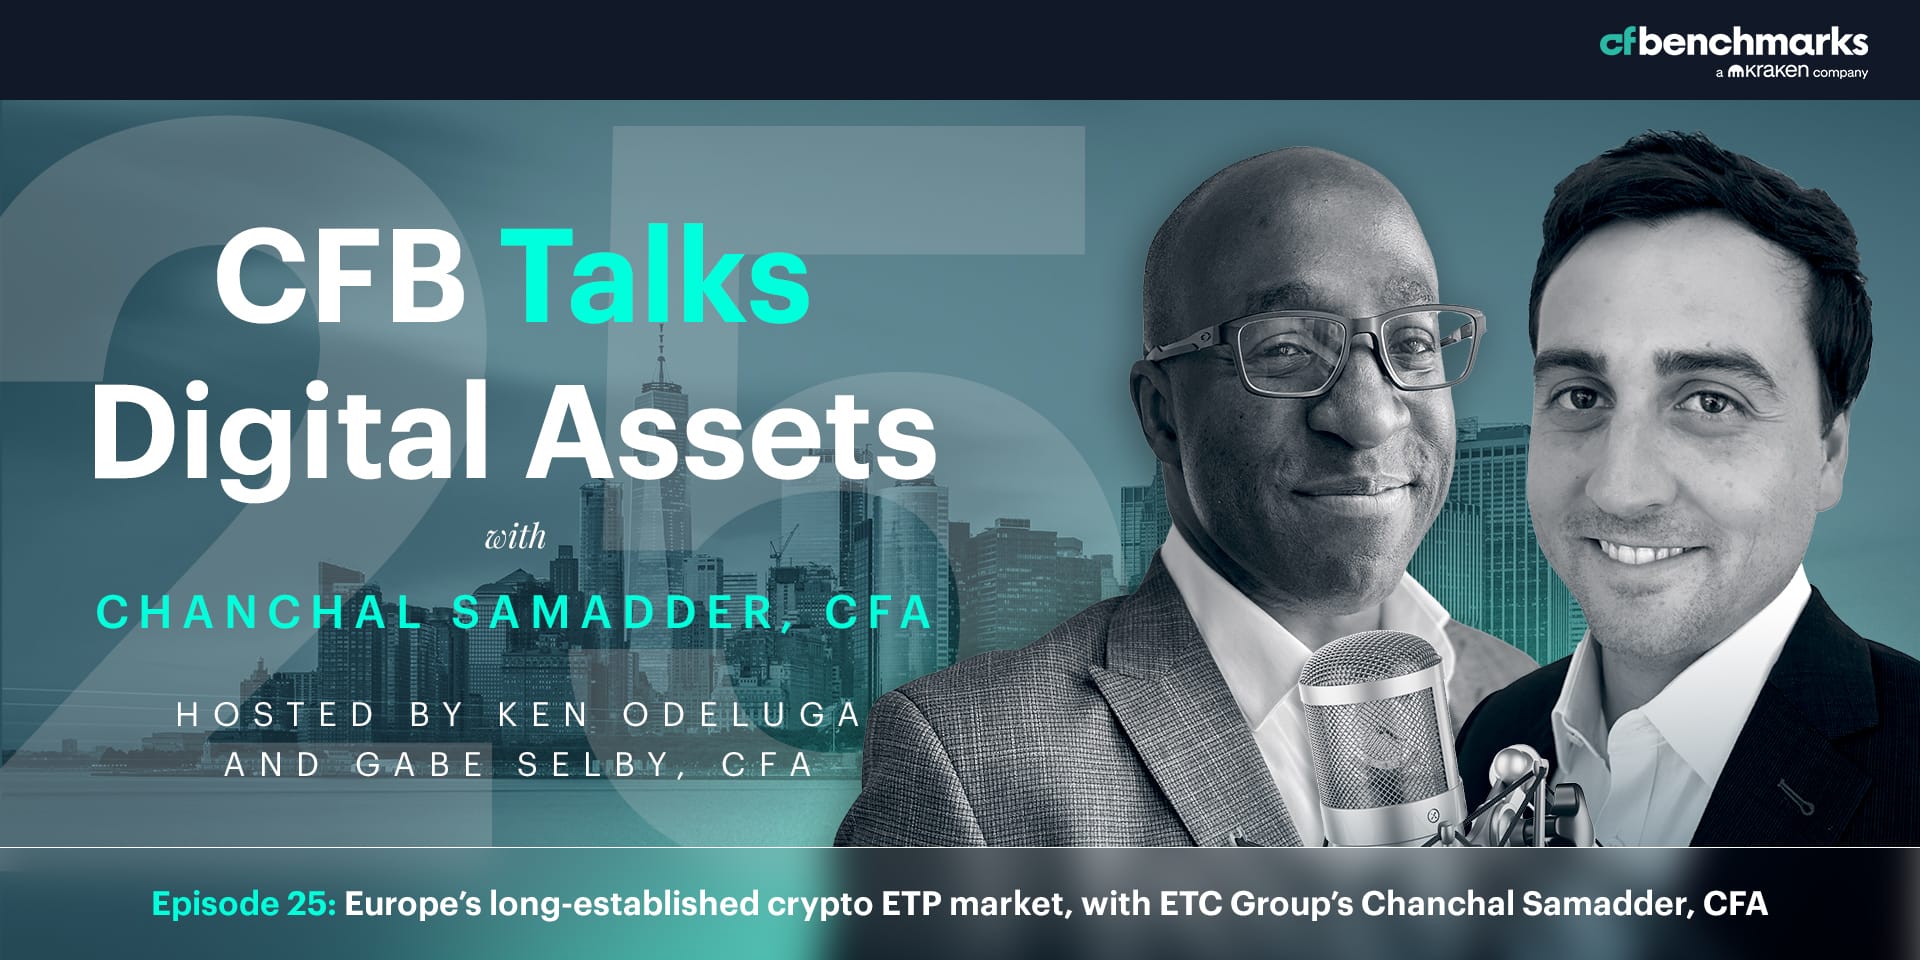 CFB Talks Digital Assets Episode 25: We launched it here first! Europe's thriving crypto ETP market, with ETC Group's Chanchal Samadder, CFA